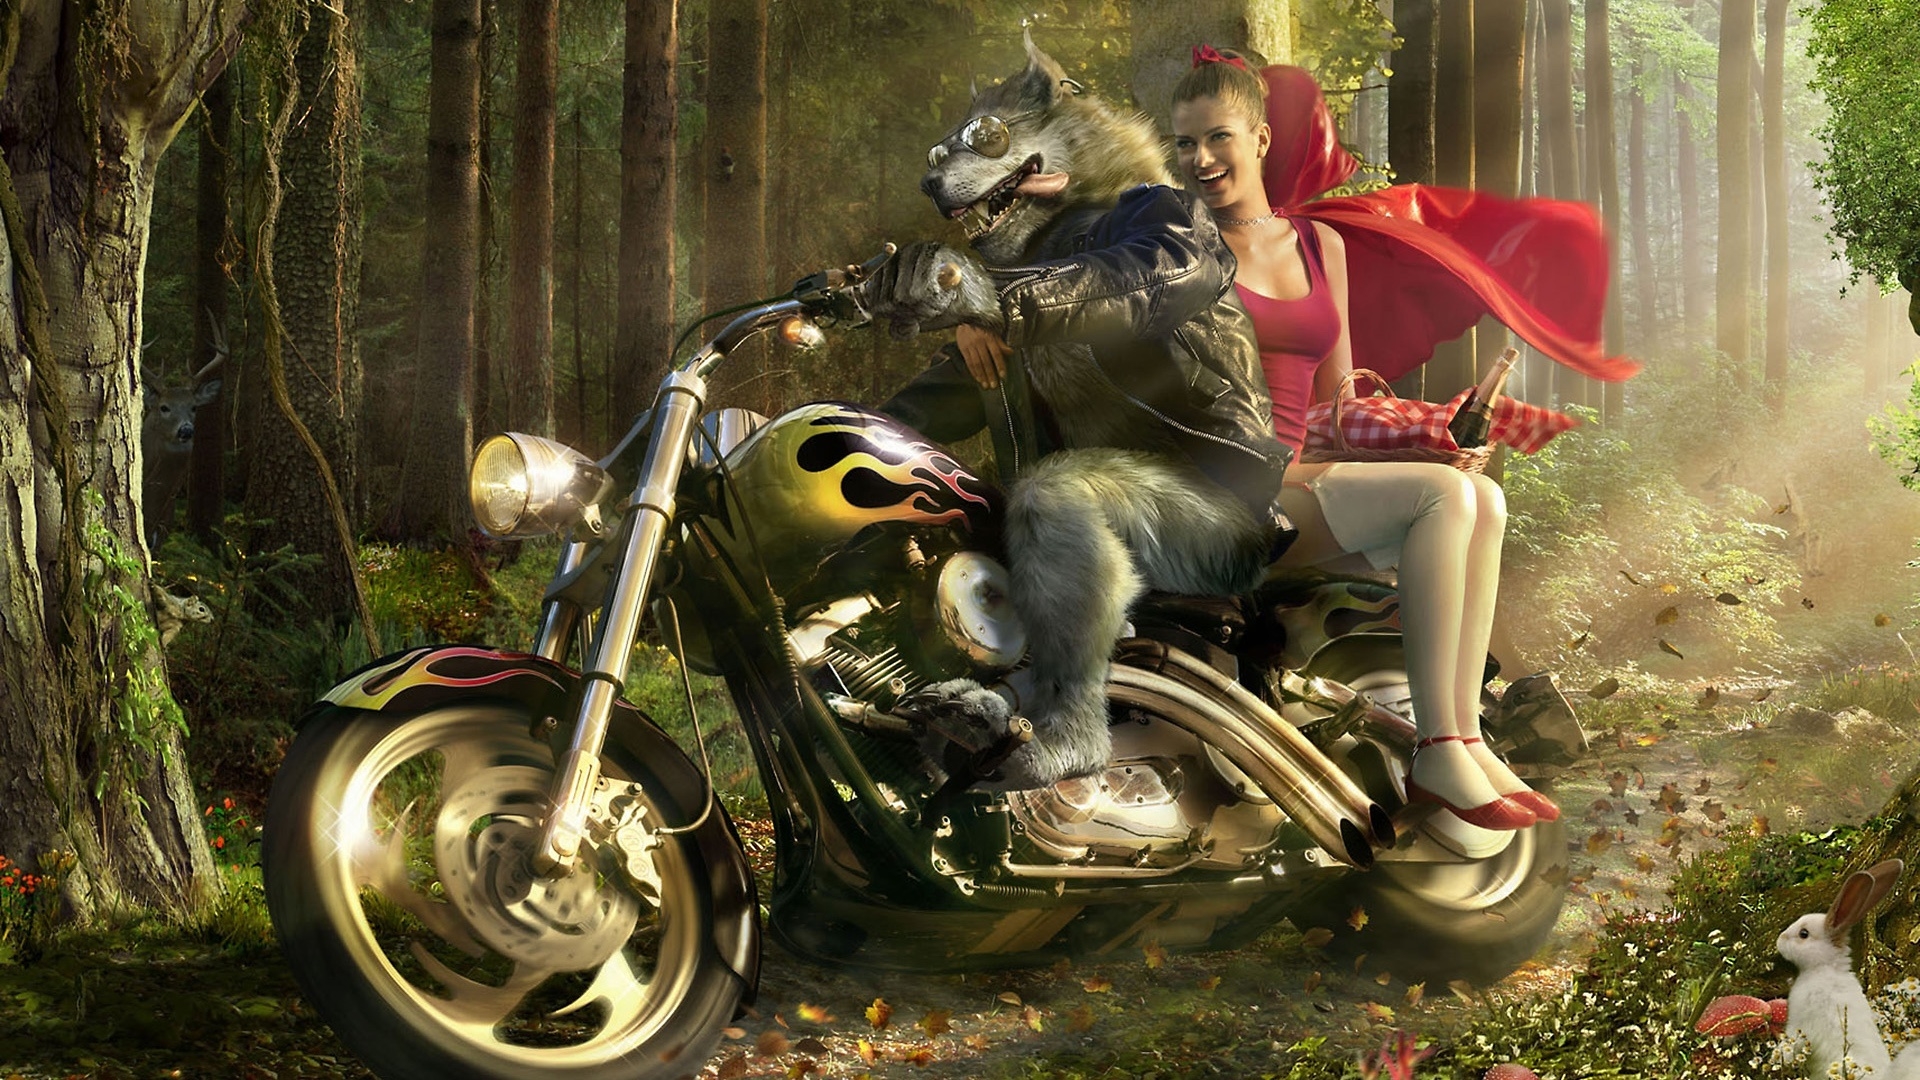 Wolf Biker and Little Red Riding Hood for 1920 x 1080 HDTV 1080p resolution